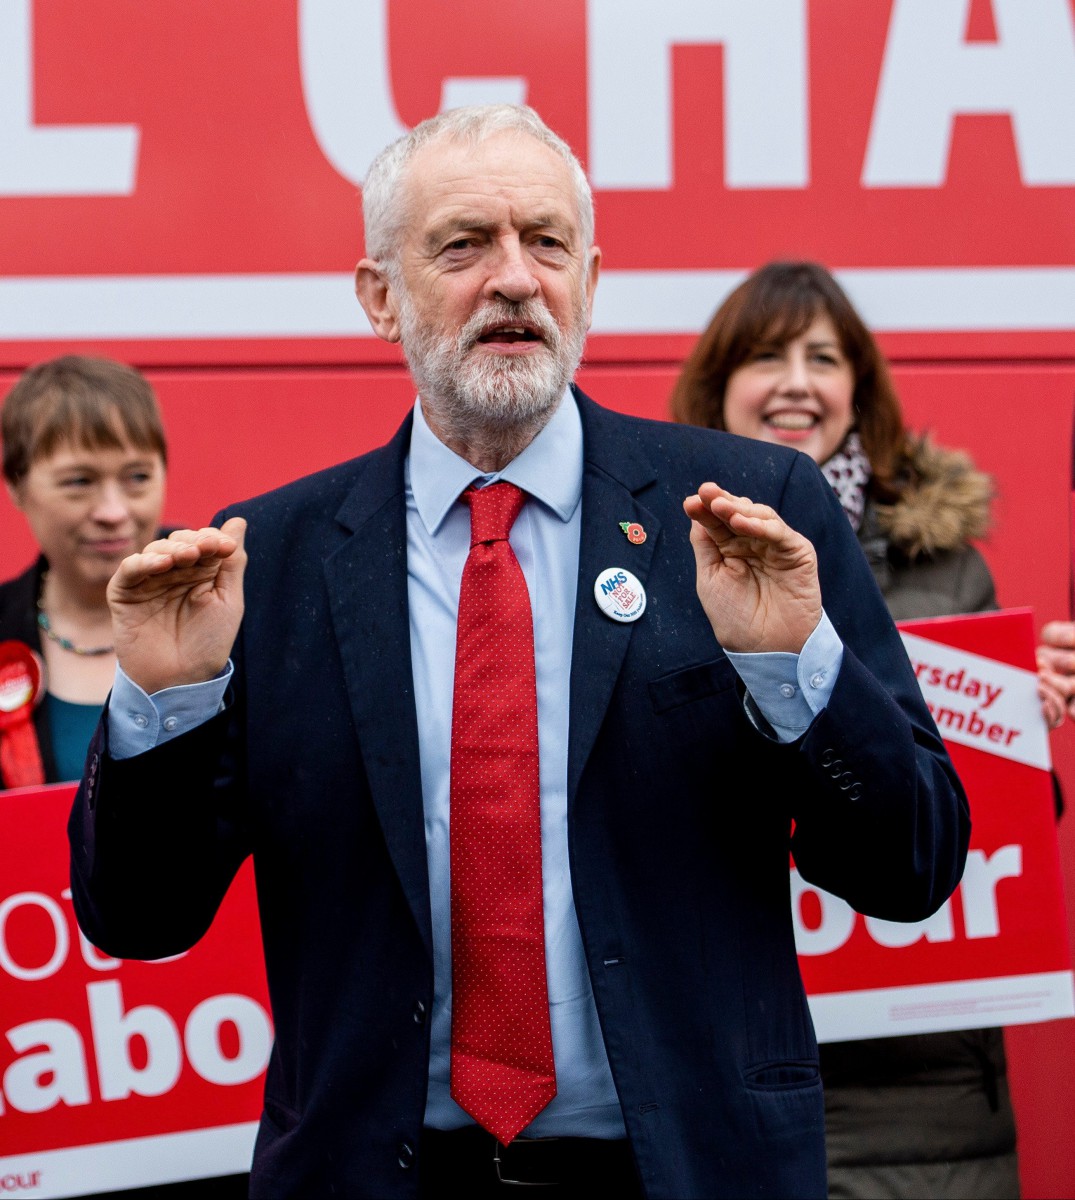 Labour politicians are in open revolt over Jeremy Corbyns decision to support a controversial candidate who made a sick joke about wife beating